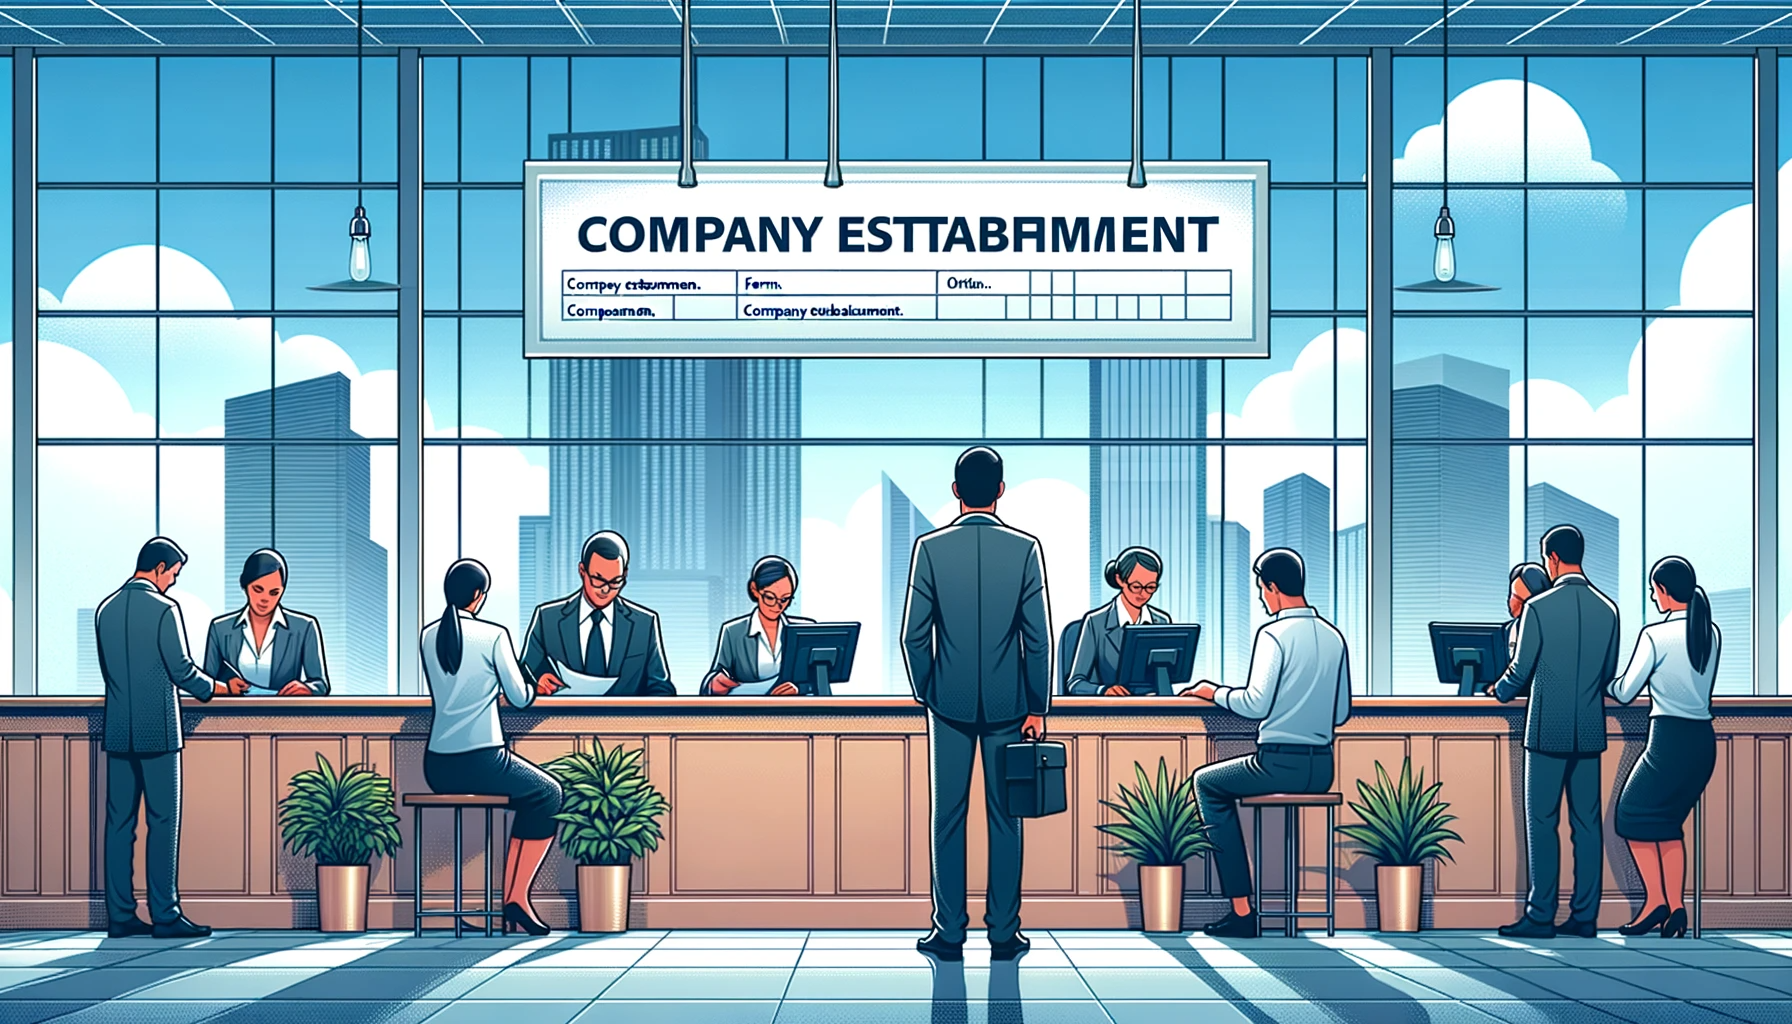 DALL·E 2023-10-25 13.15.55 - Wide illustration of a panoramic office view where a person is at the forefront, submitting a Company Establishment form at a registration counter. 